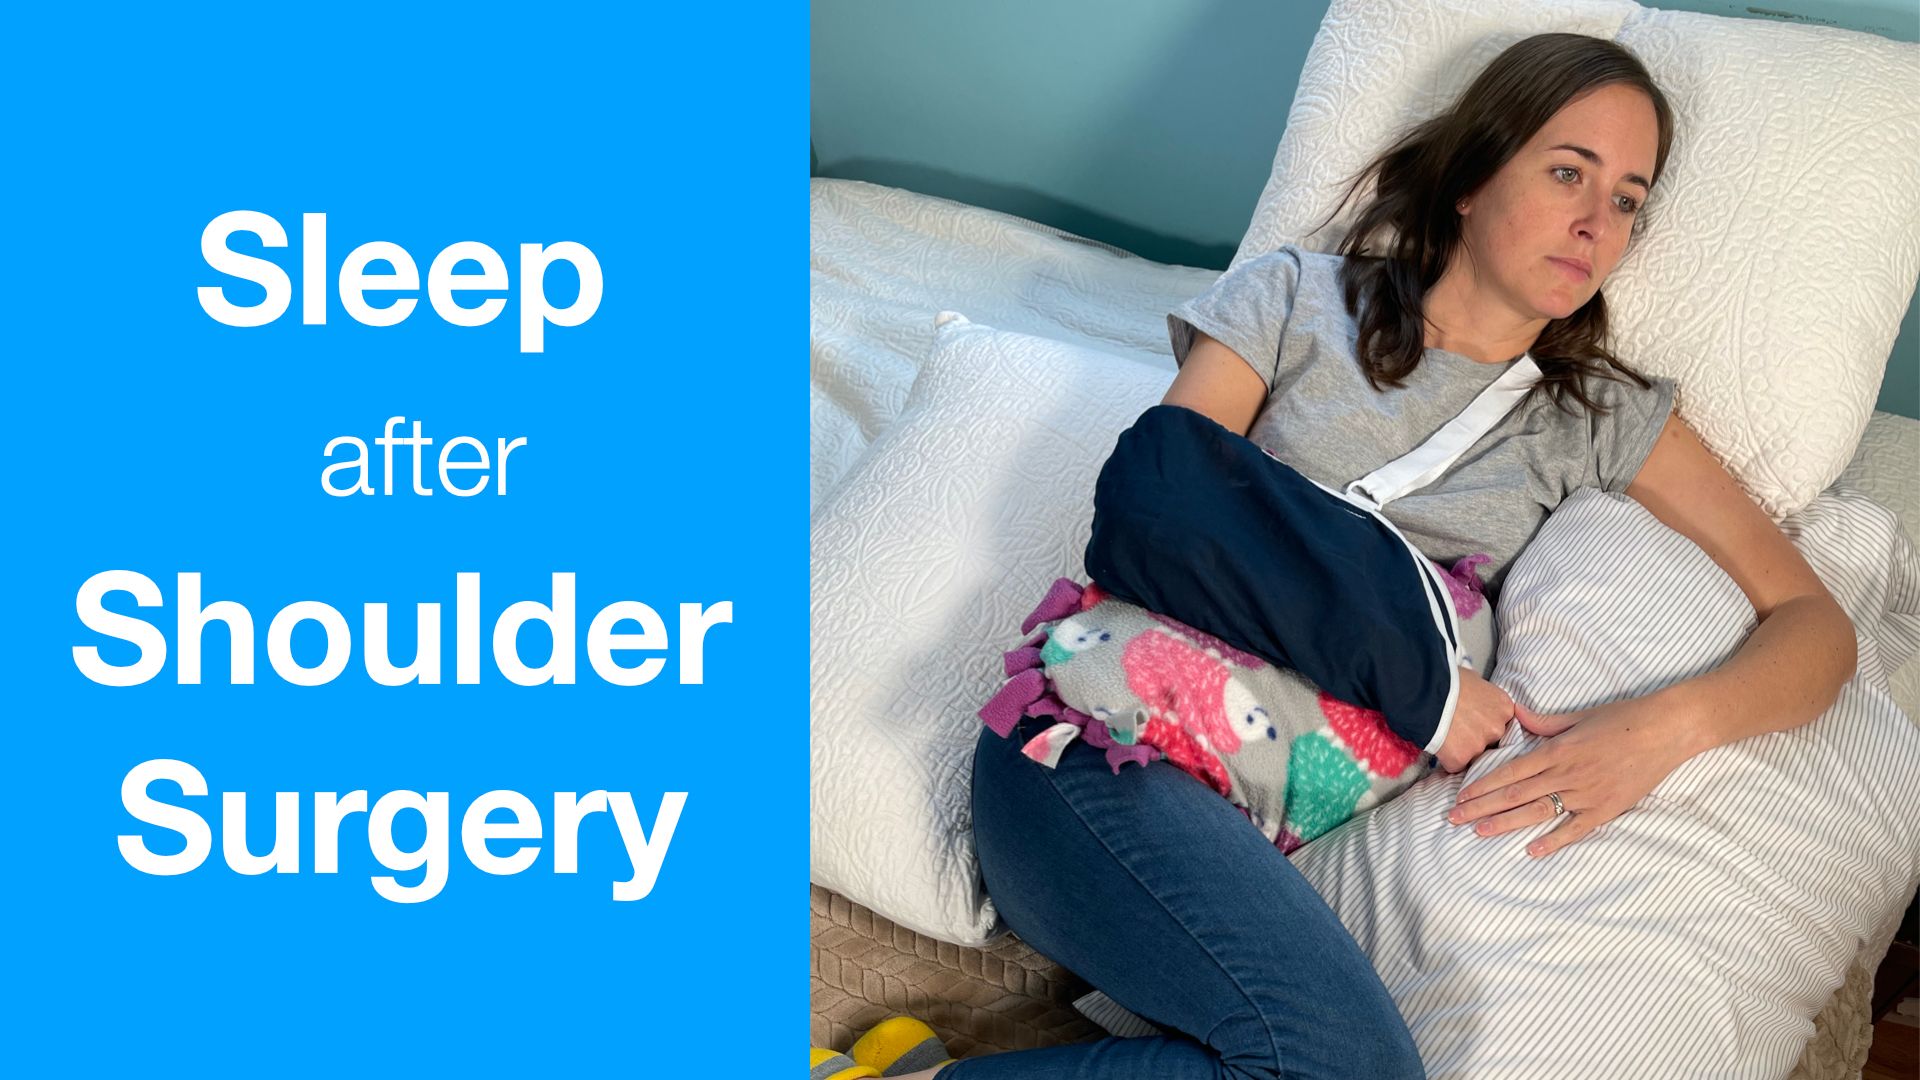 How to Sleep After Shoulder Surgery - EquipMeOT